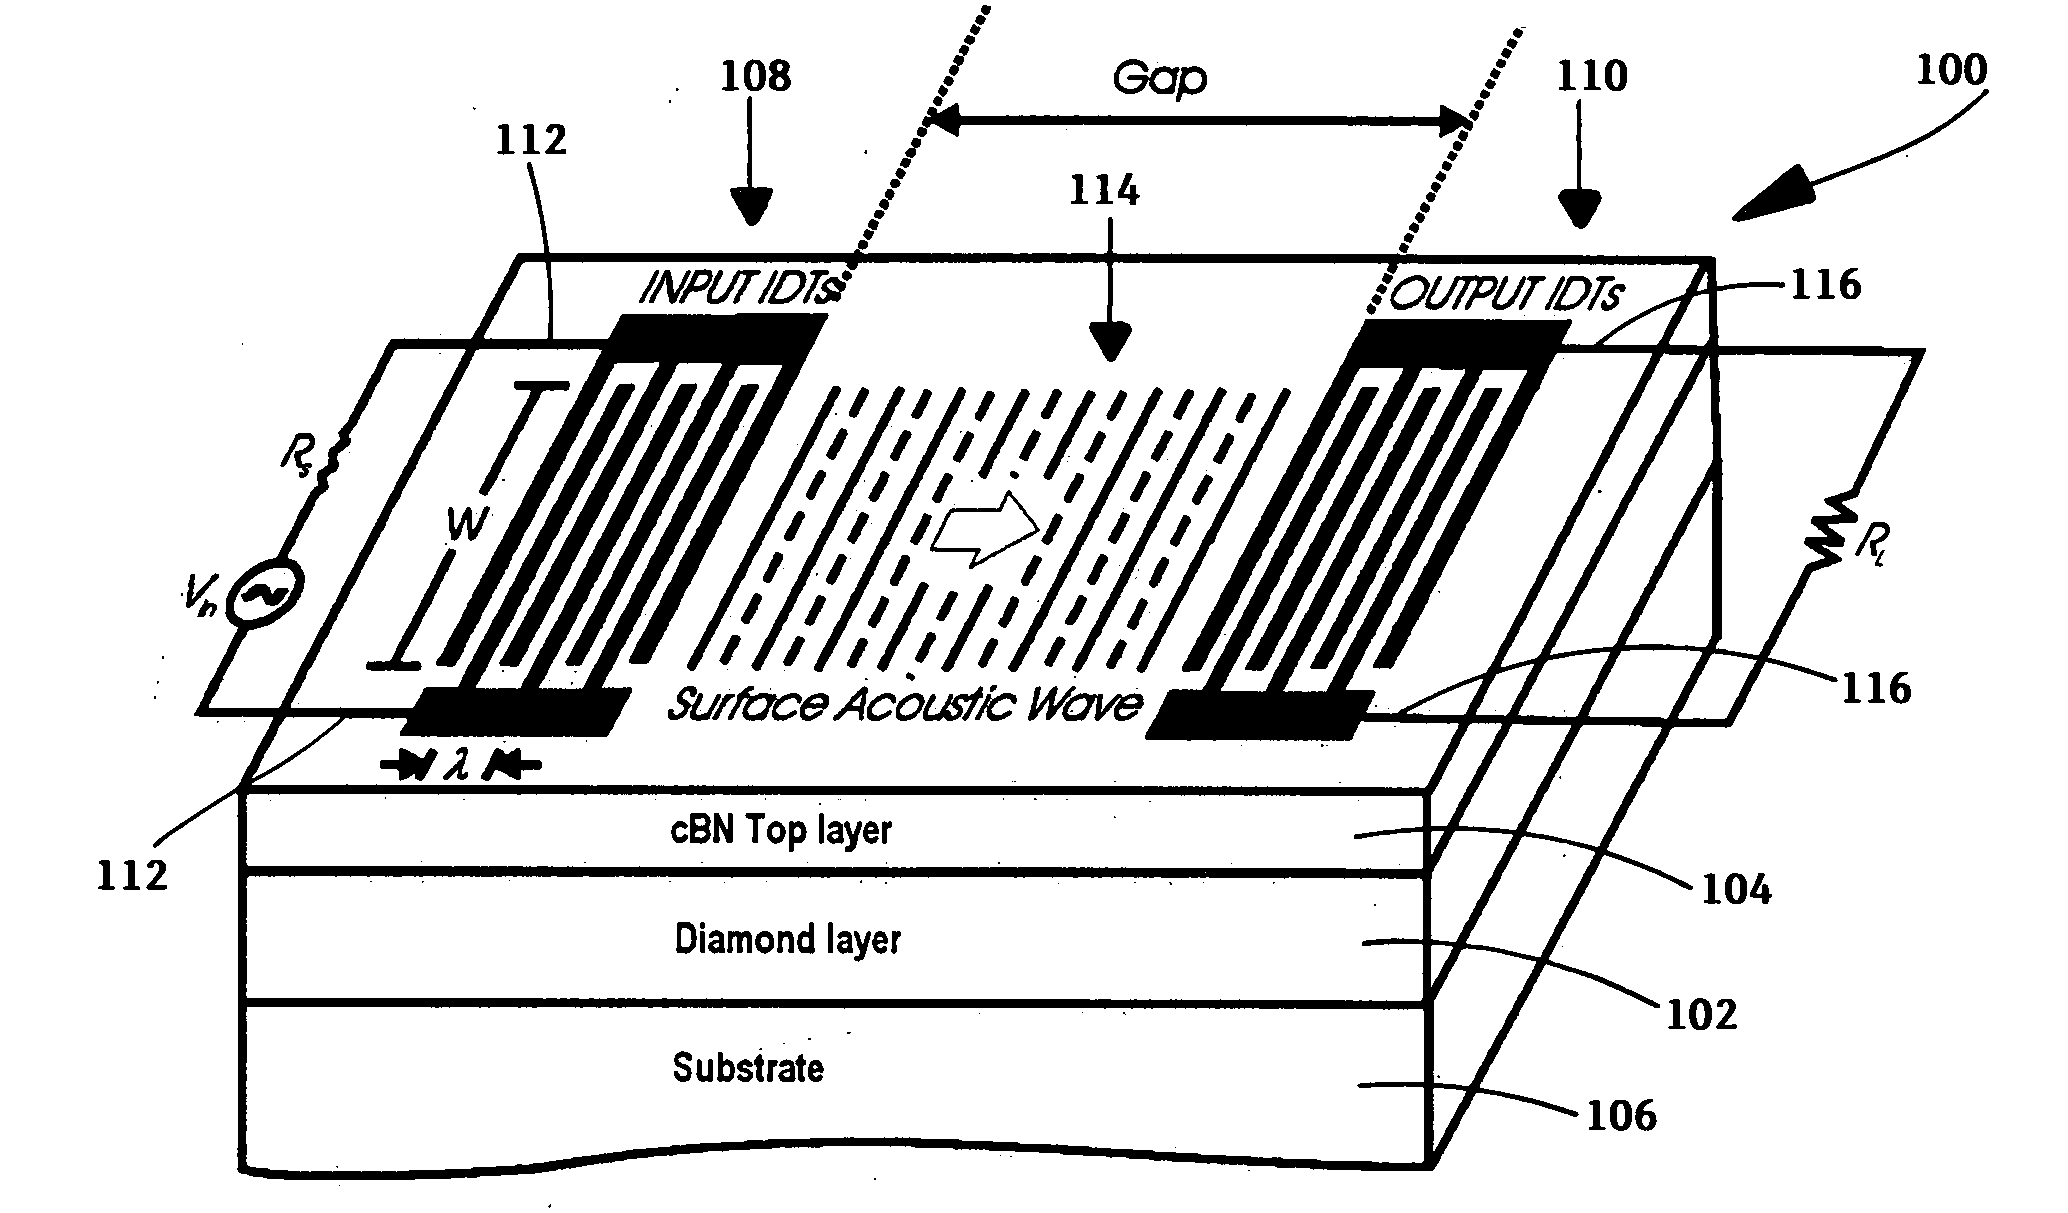 Surface acoustic wave (SAW) devices based on cubic boron nitride/diamond composite structures